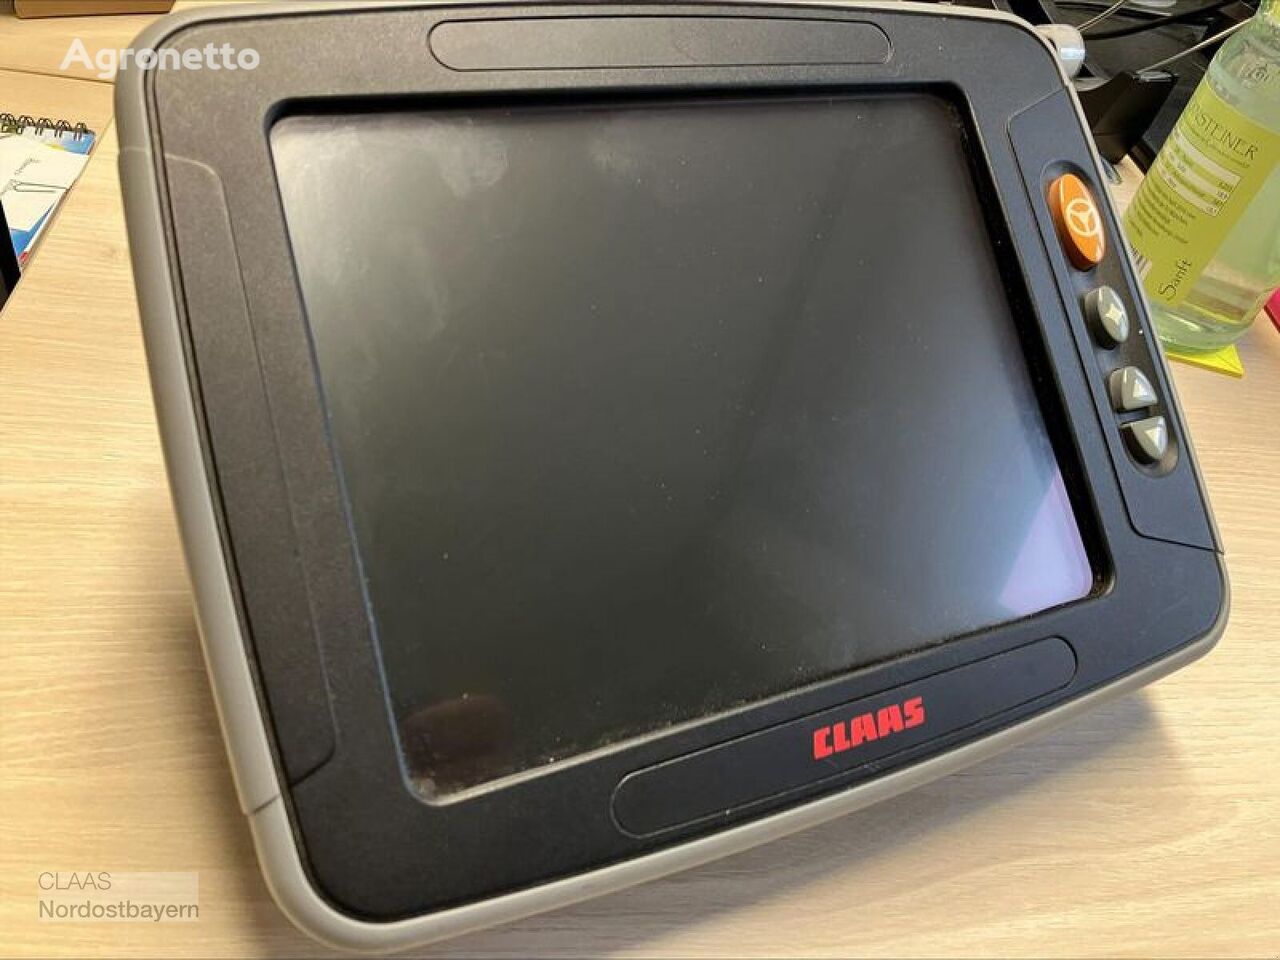 Claas monitor for wheel tractor